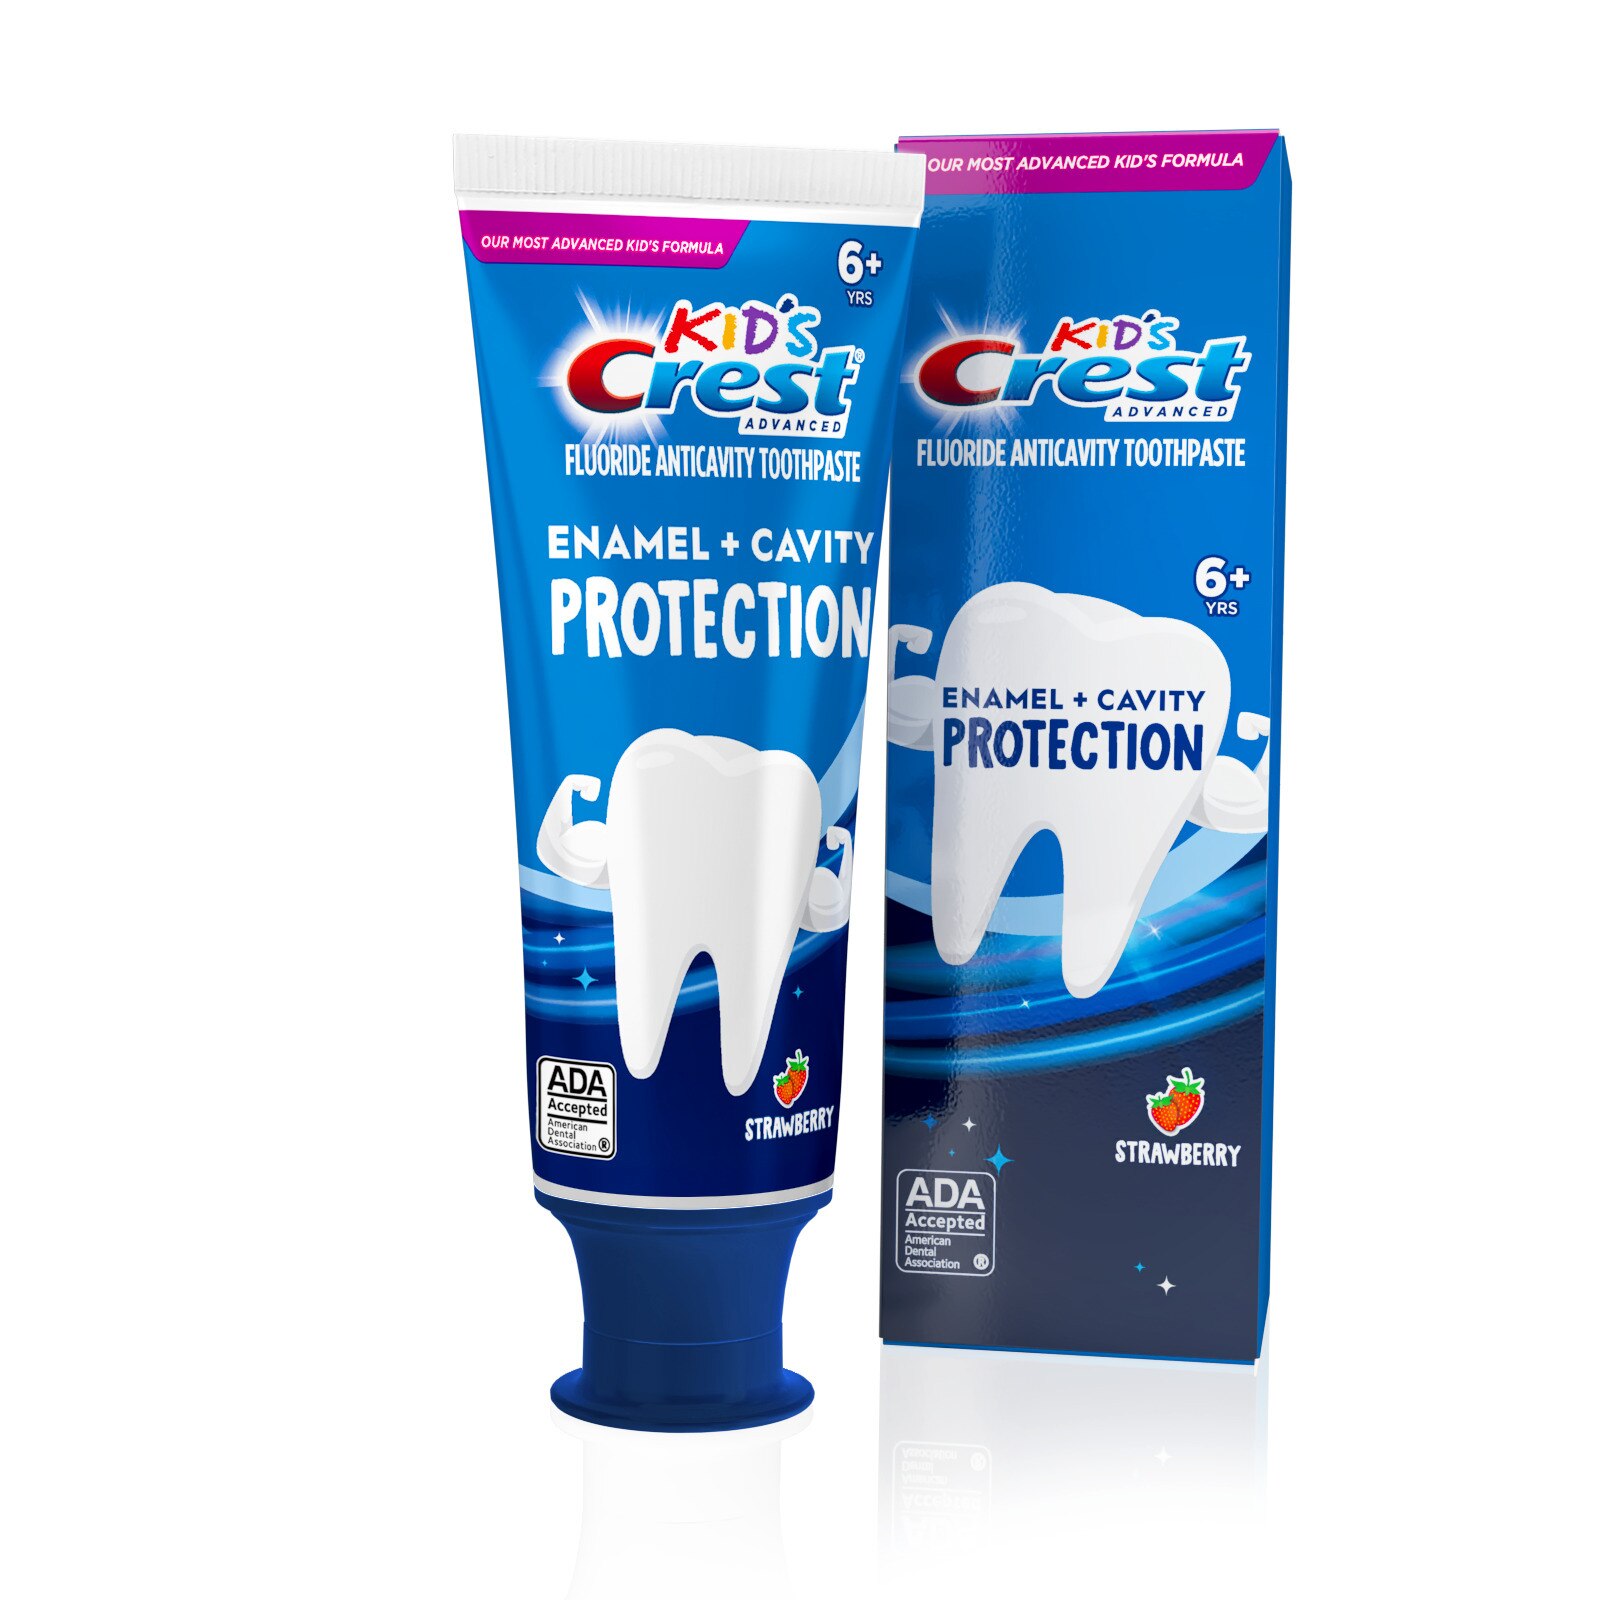 Crest Kids Enamel + Cavity Protection Toothpaste Ages 6+, Strawberry, 4.1 OZ